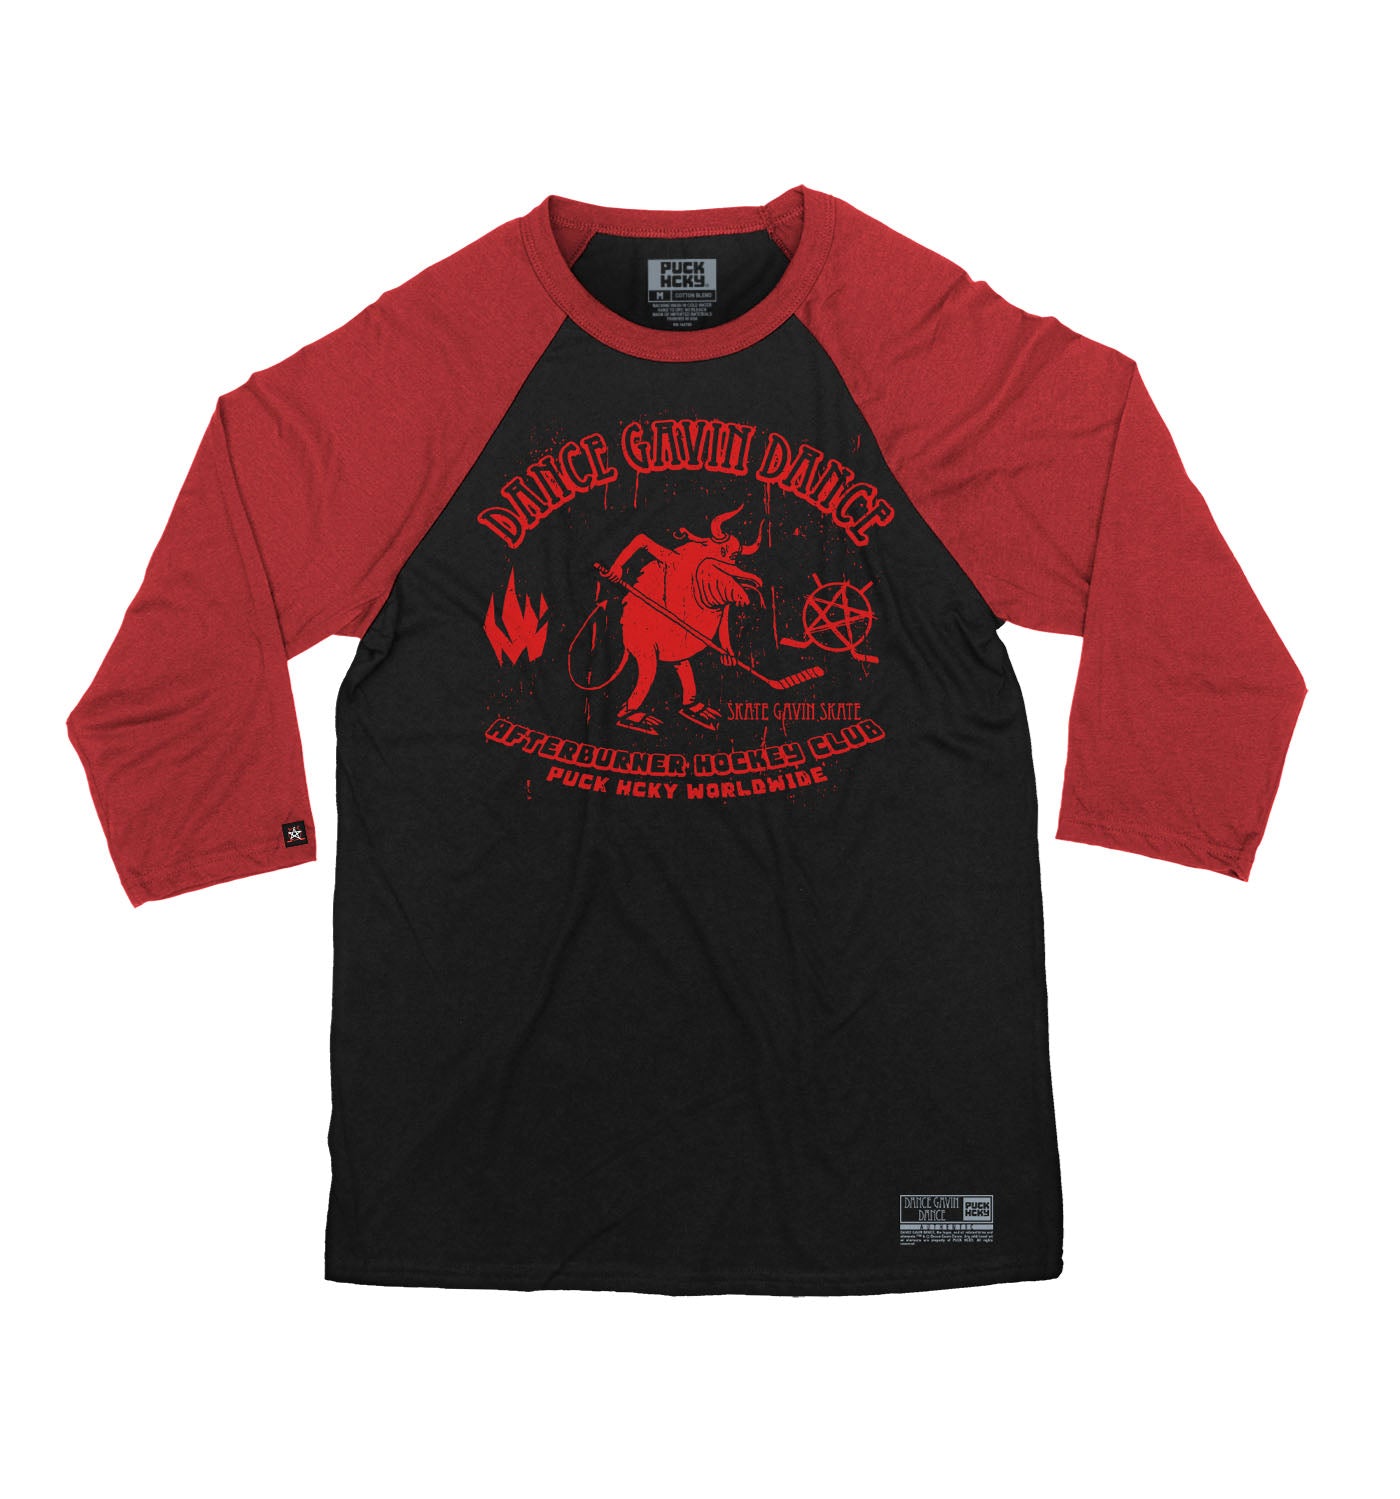 DANCE GAVIN DANCE ‘AFTERBURNER’ hockey raglan t-shirt in black with red sleeves front view